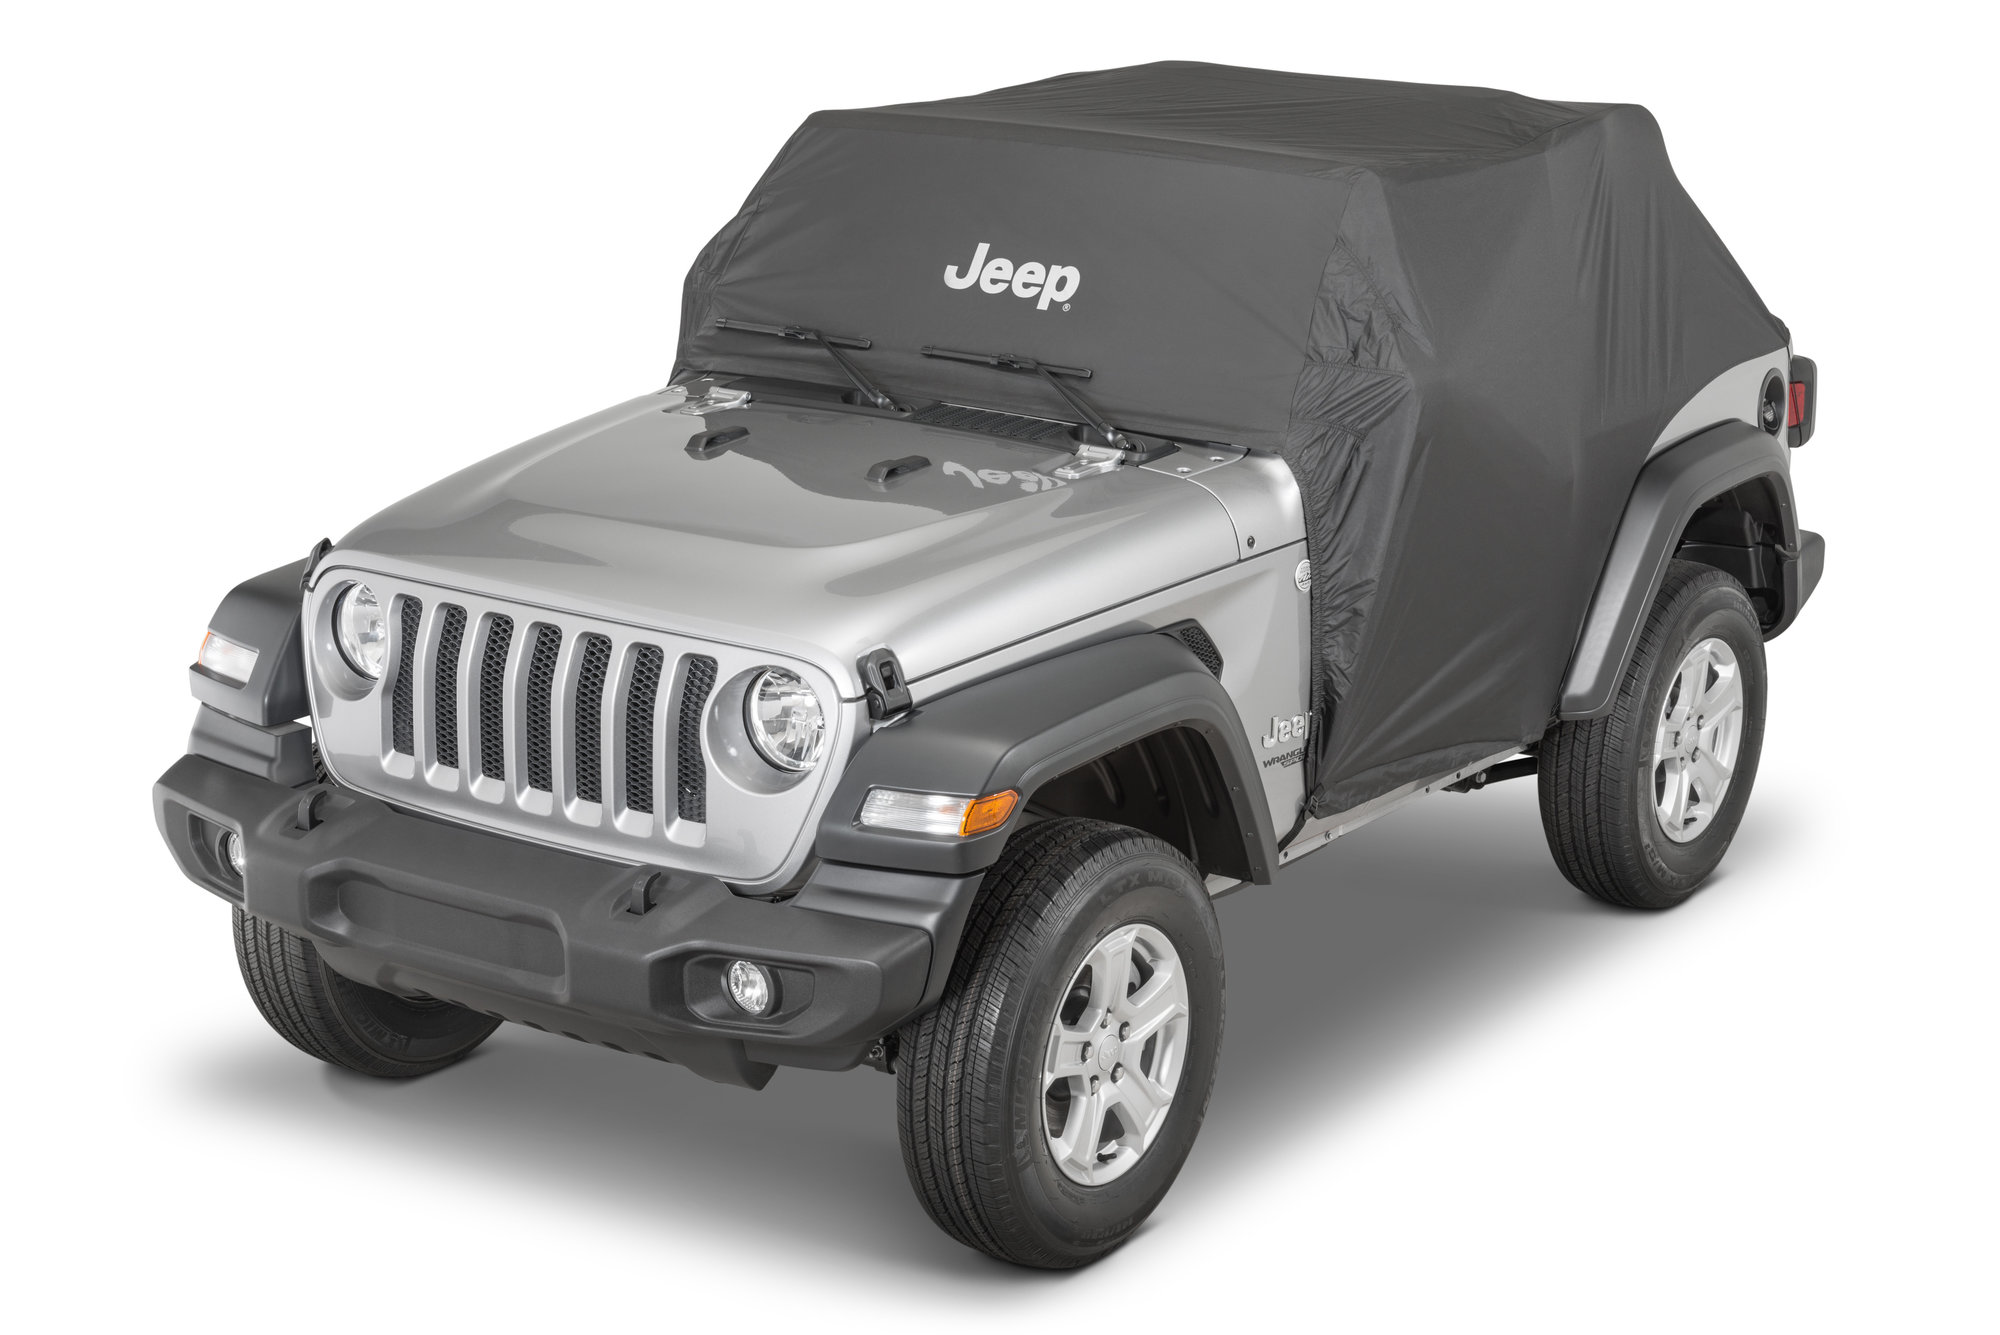 JEEP WRANGLER Black Water Resistent Nylon Cab Cover With Jeep Logo NEW OEM MOPAR